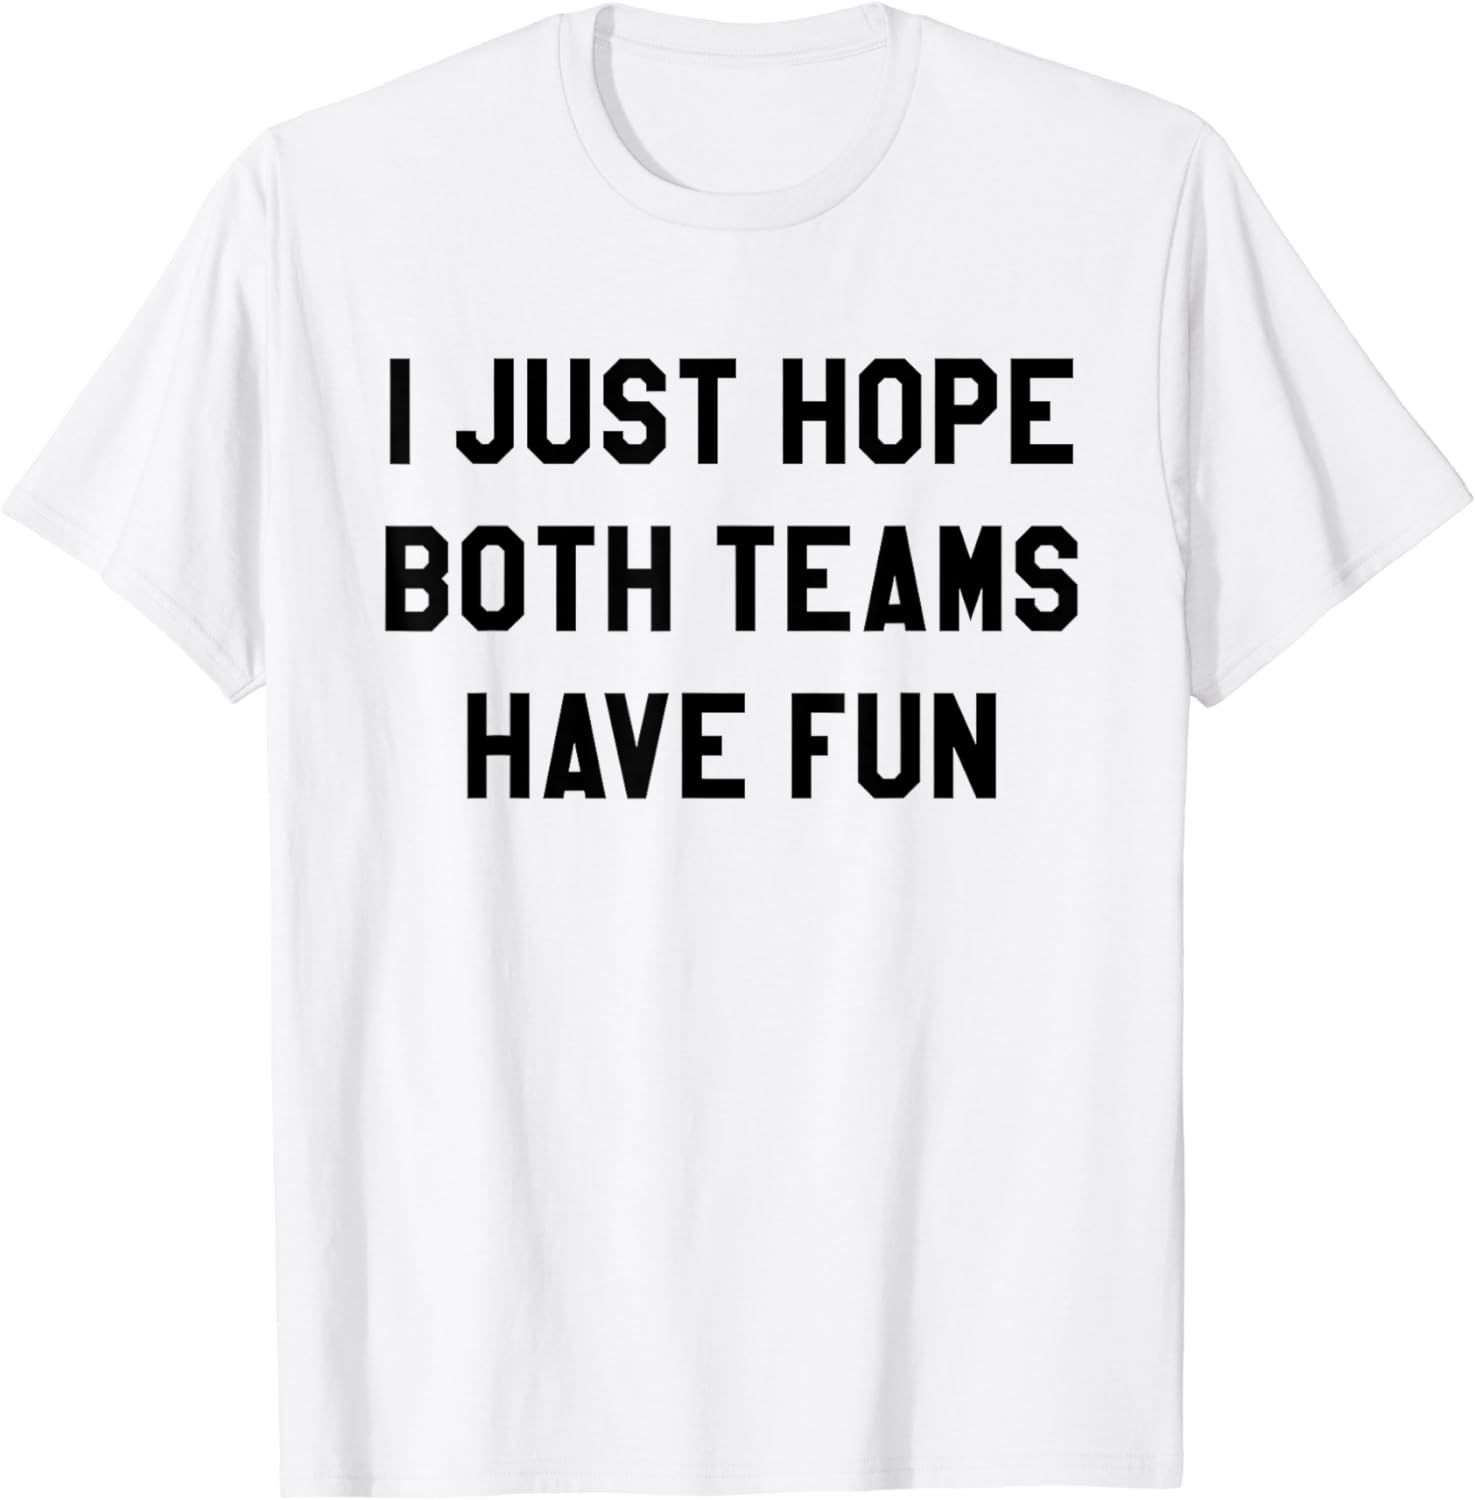 I Just Hope Both Teams Have Fun T Shirts for Men,Women,Kids | Amazon (US)